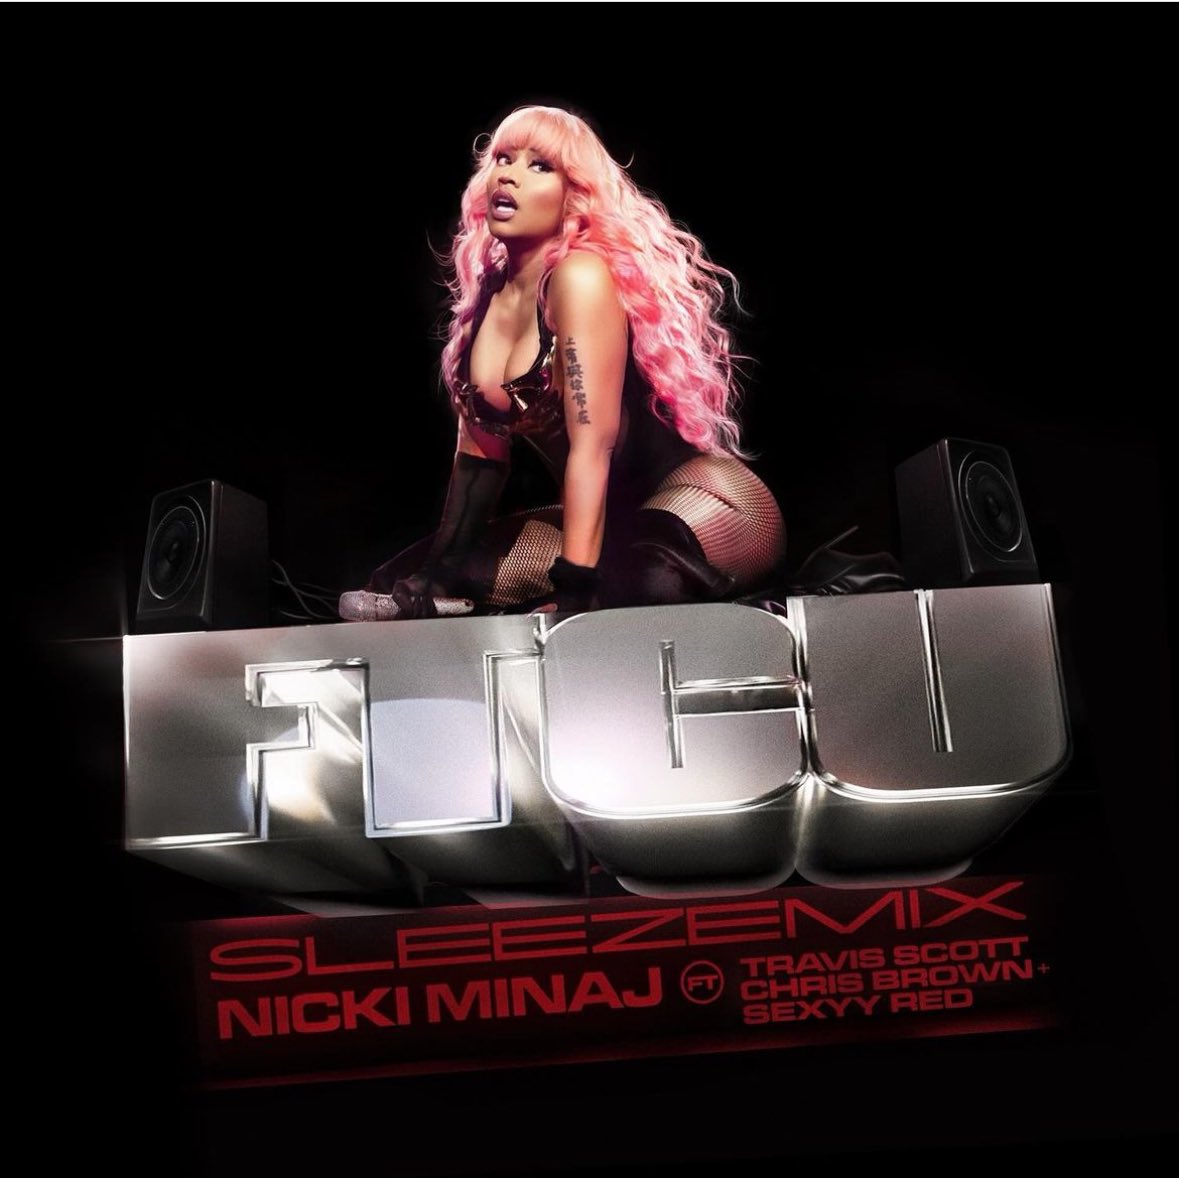 .@NICKIMINAJ having Travis Scott featured on the “FTCU” remix is tea. From “c*ck sucker of the year” to music collaborators 😭 I love to see that Travis isn’t holding bad blood.